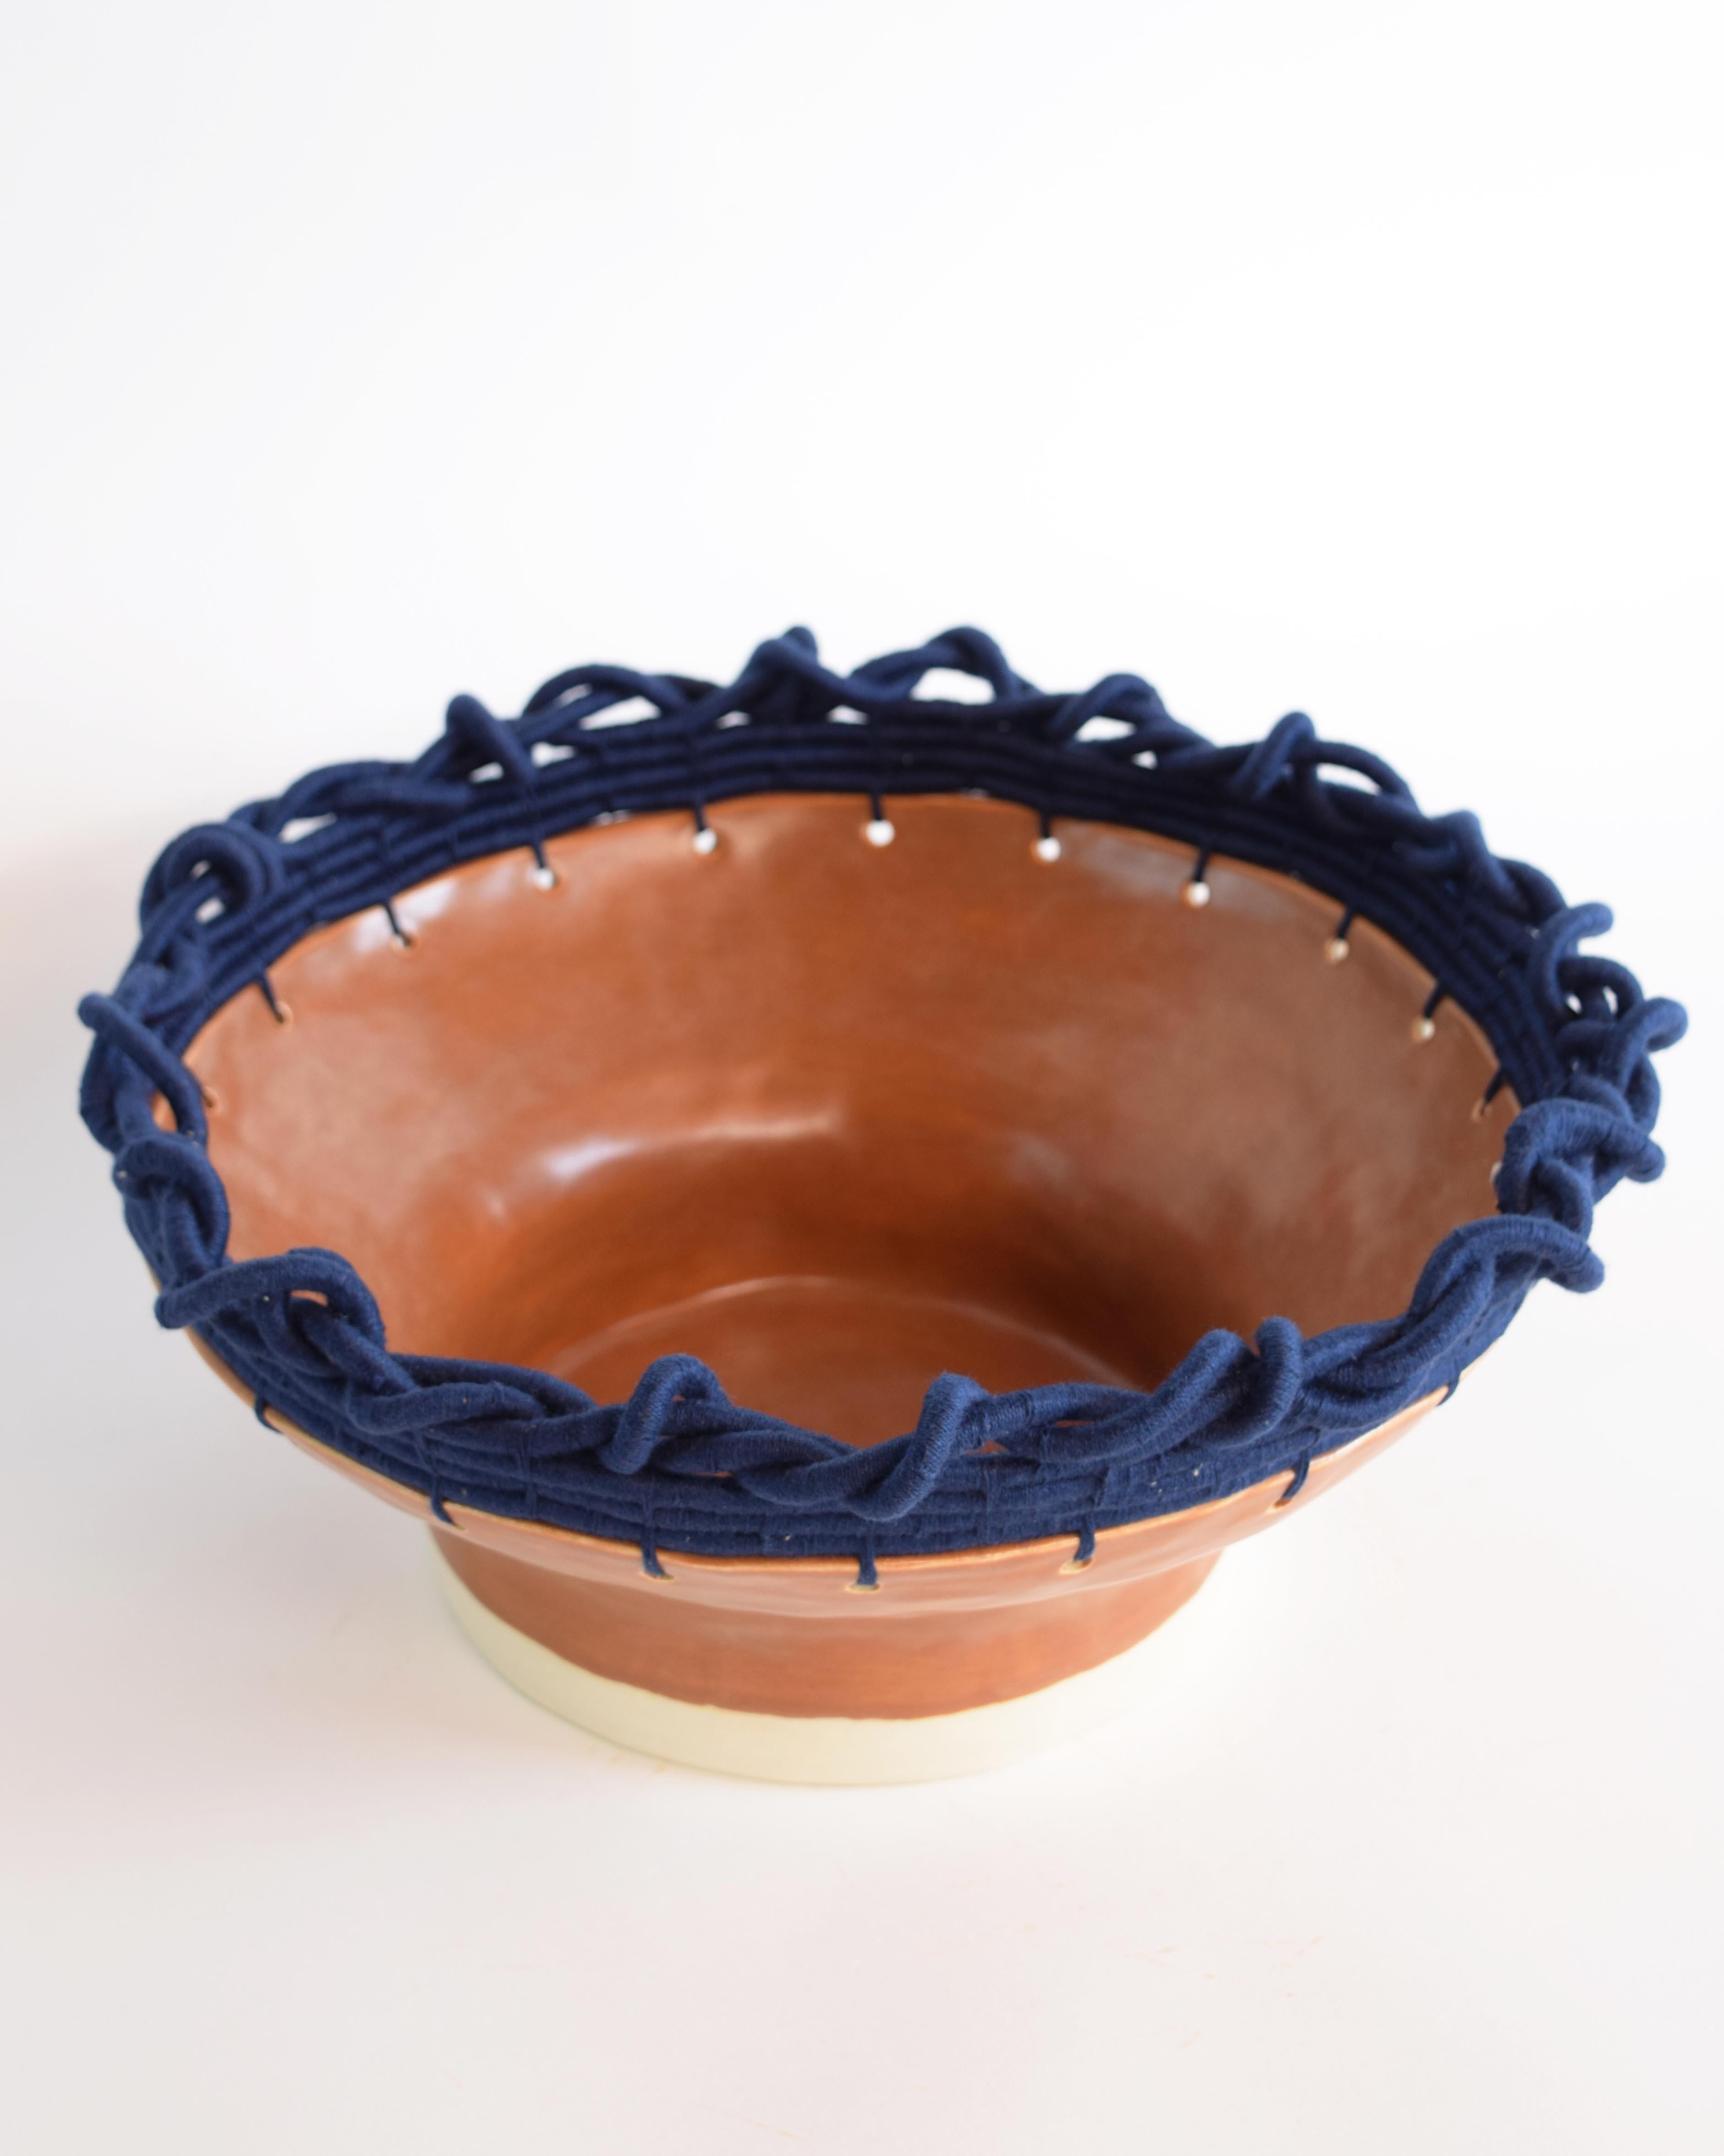 Hand formed stoneware bowl with brown glaze. Woven navy cotton edge detail. For decorative use only.

13